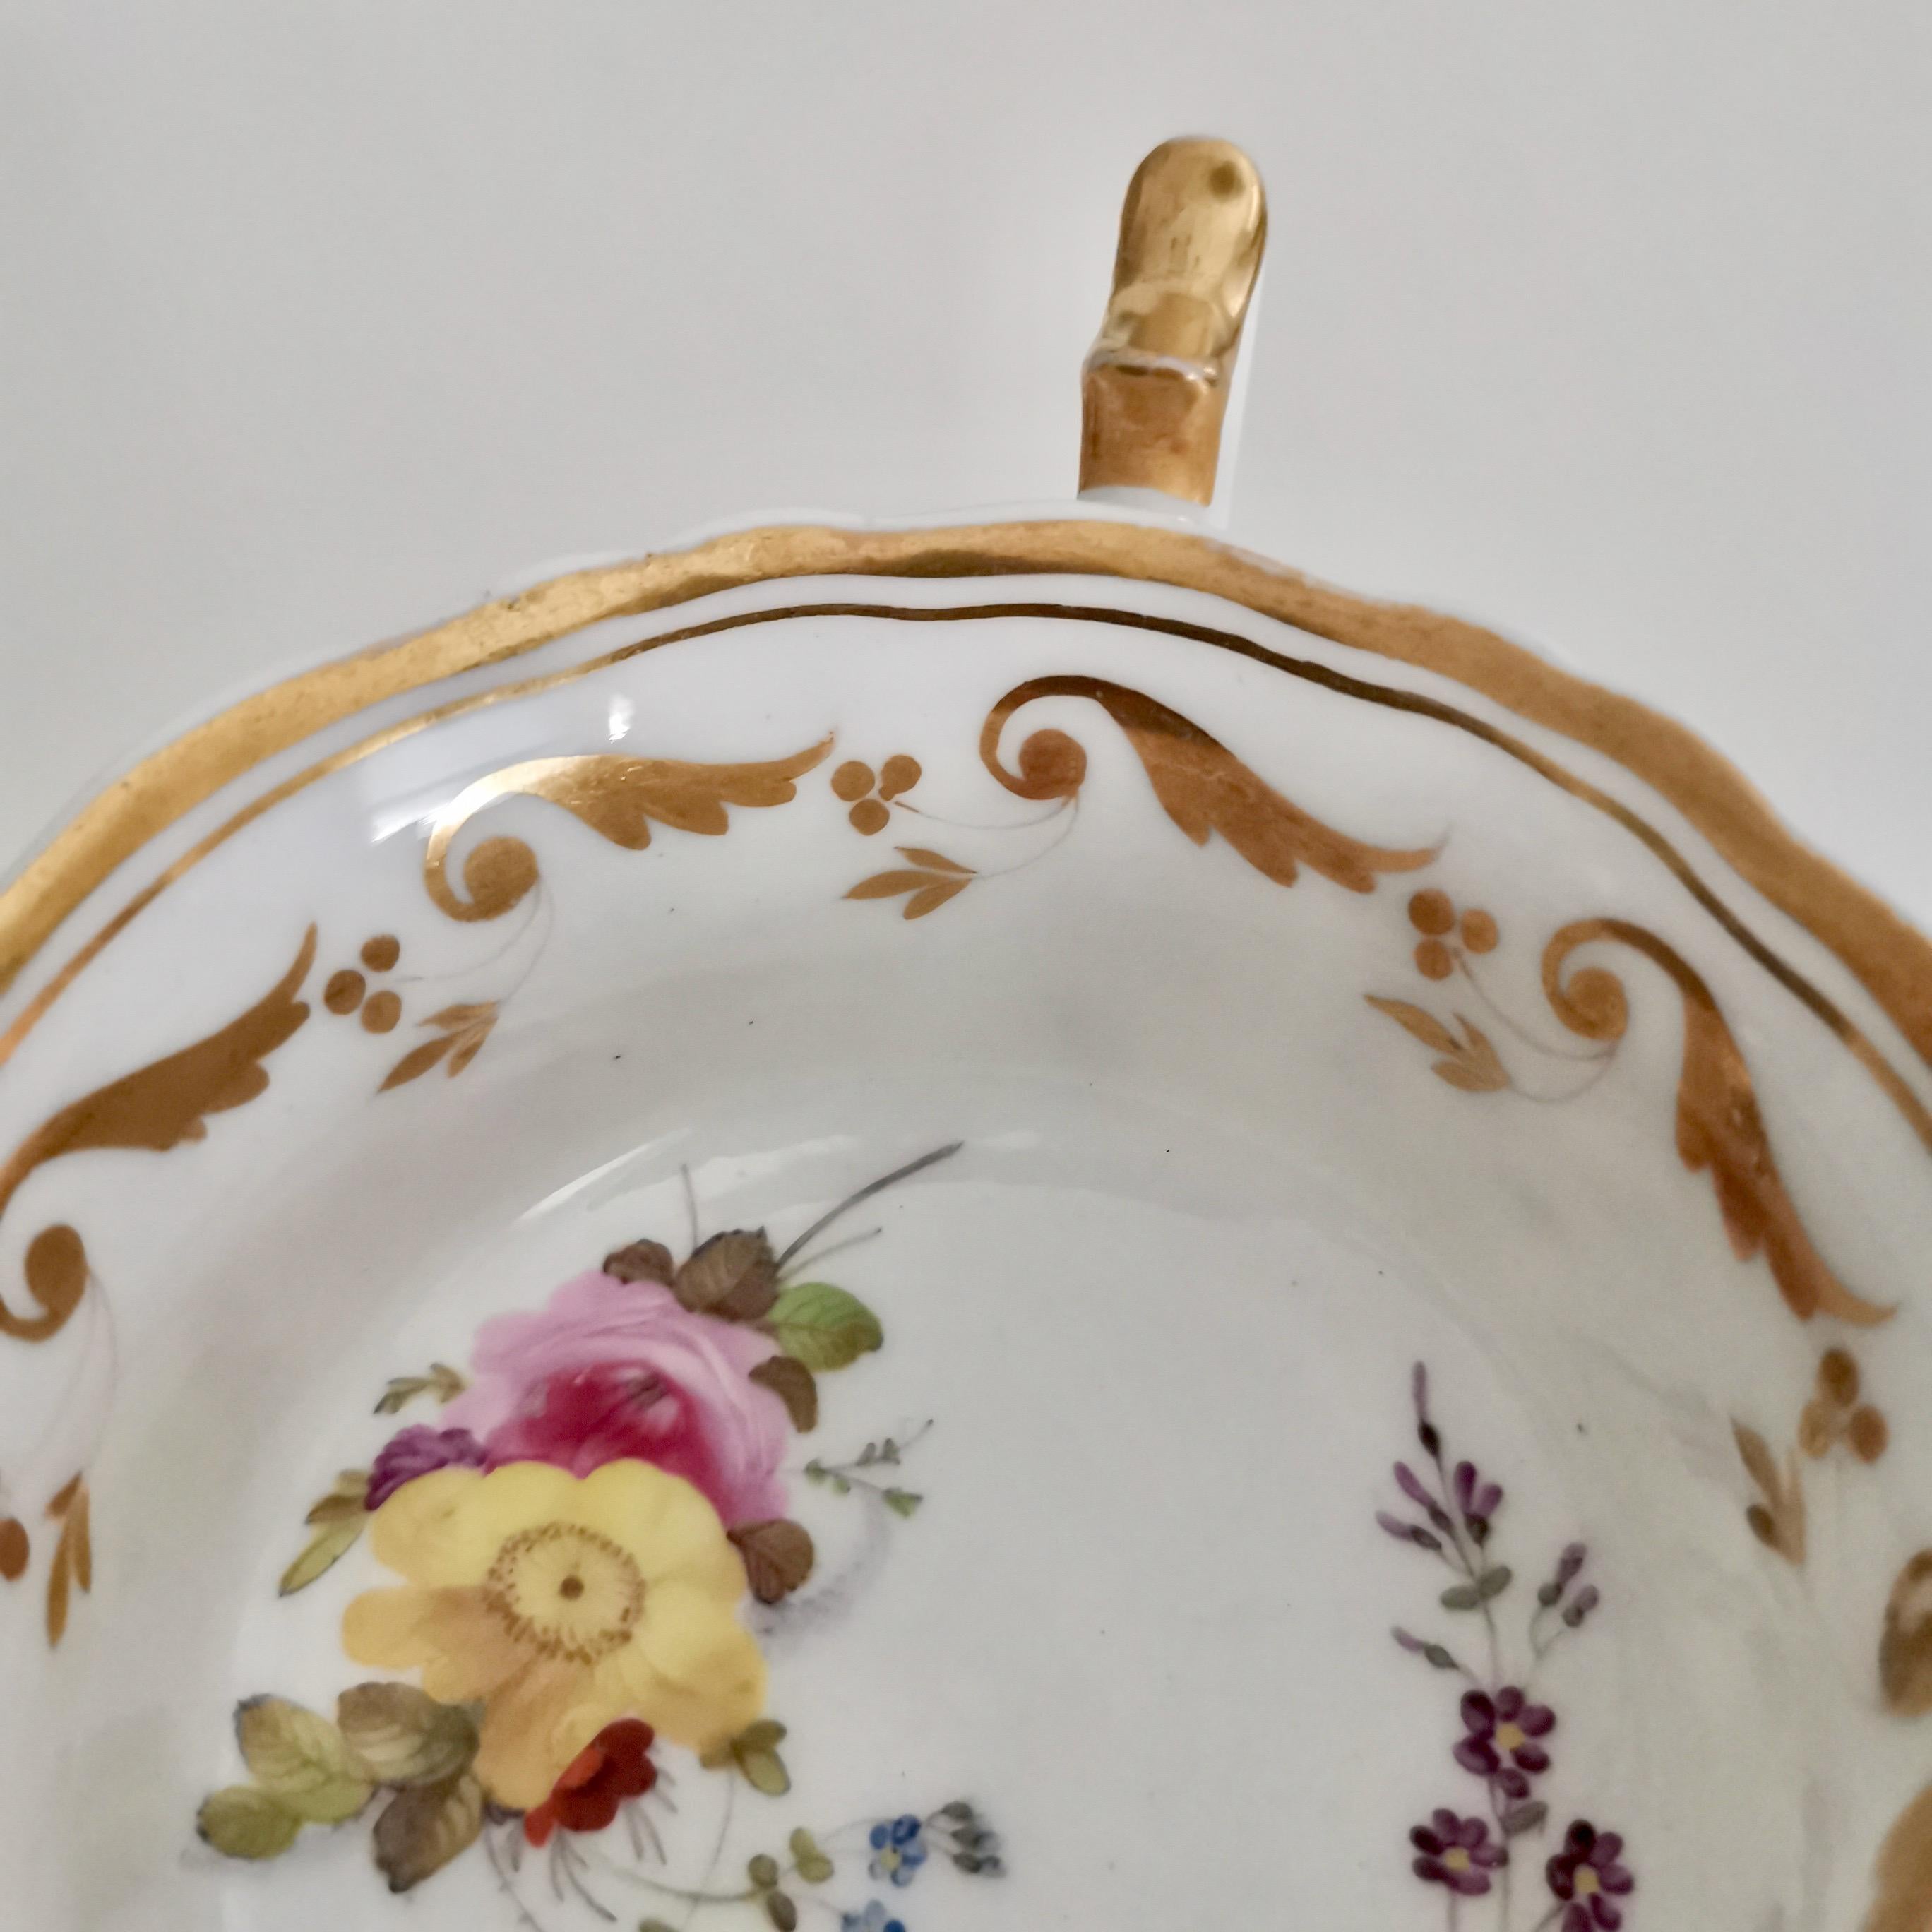 Yates Porcelain Teacup, White with Gilt and Flowers, Regency, circa 1825 4